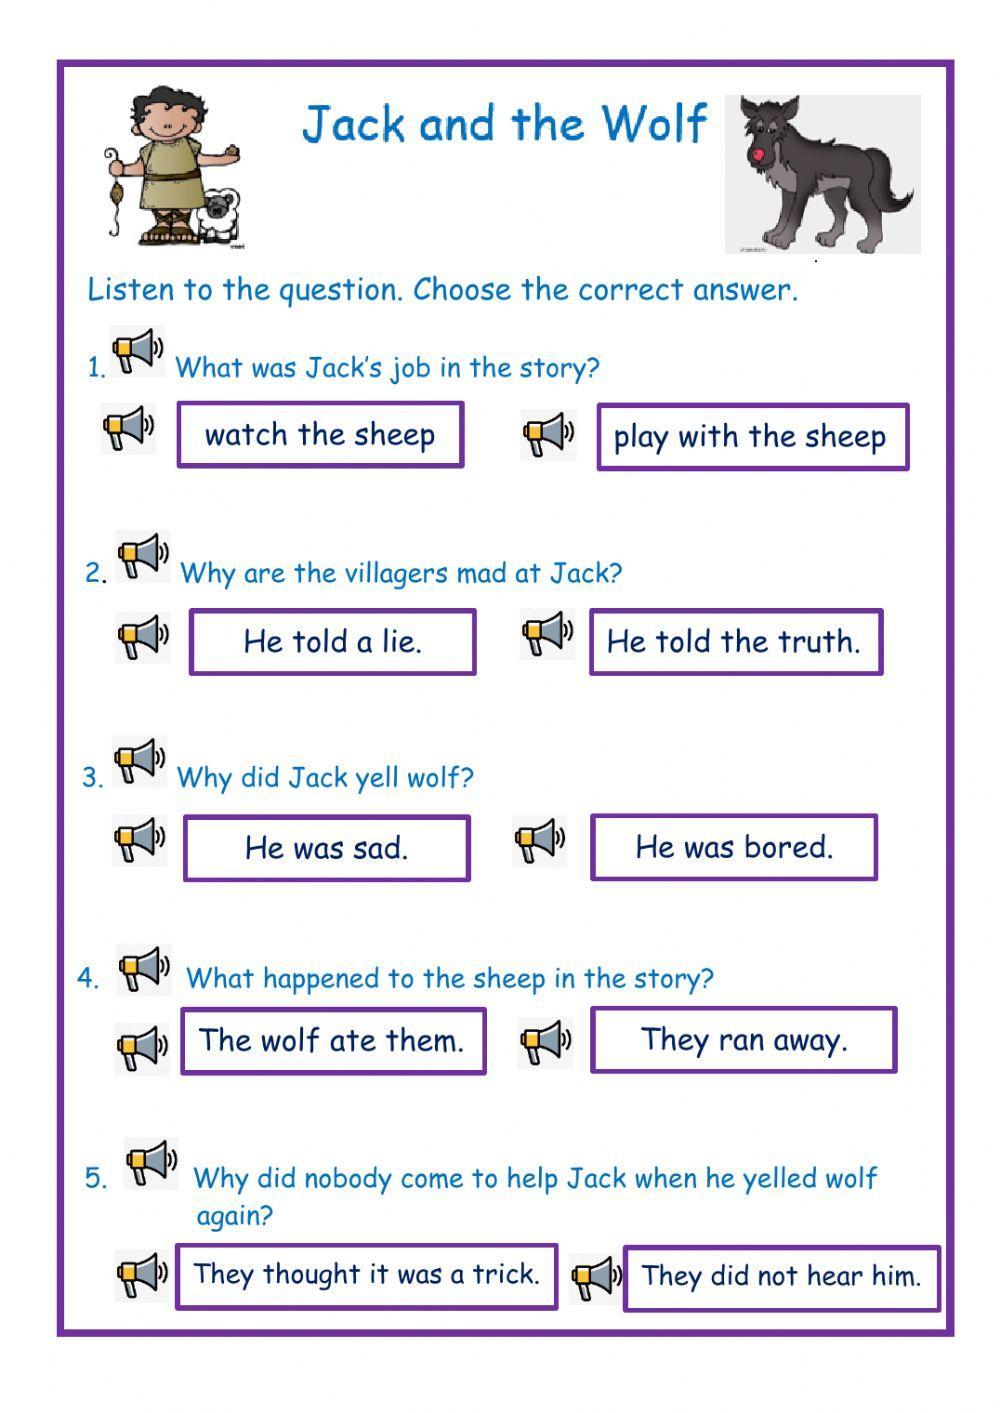 Jack and the Wolf Comprehension Guide